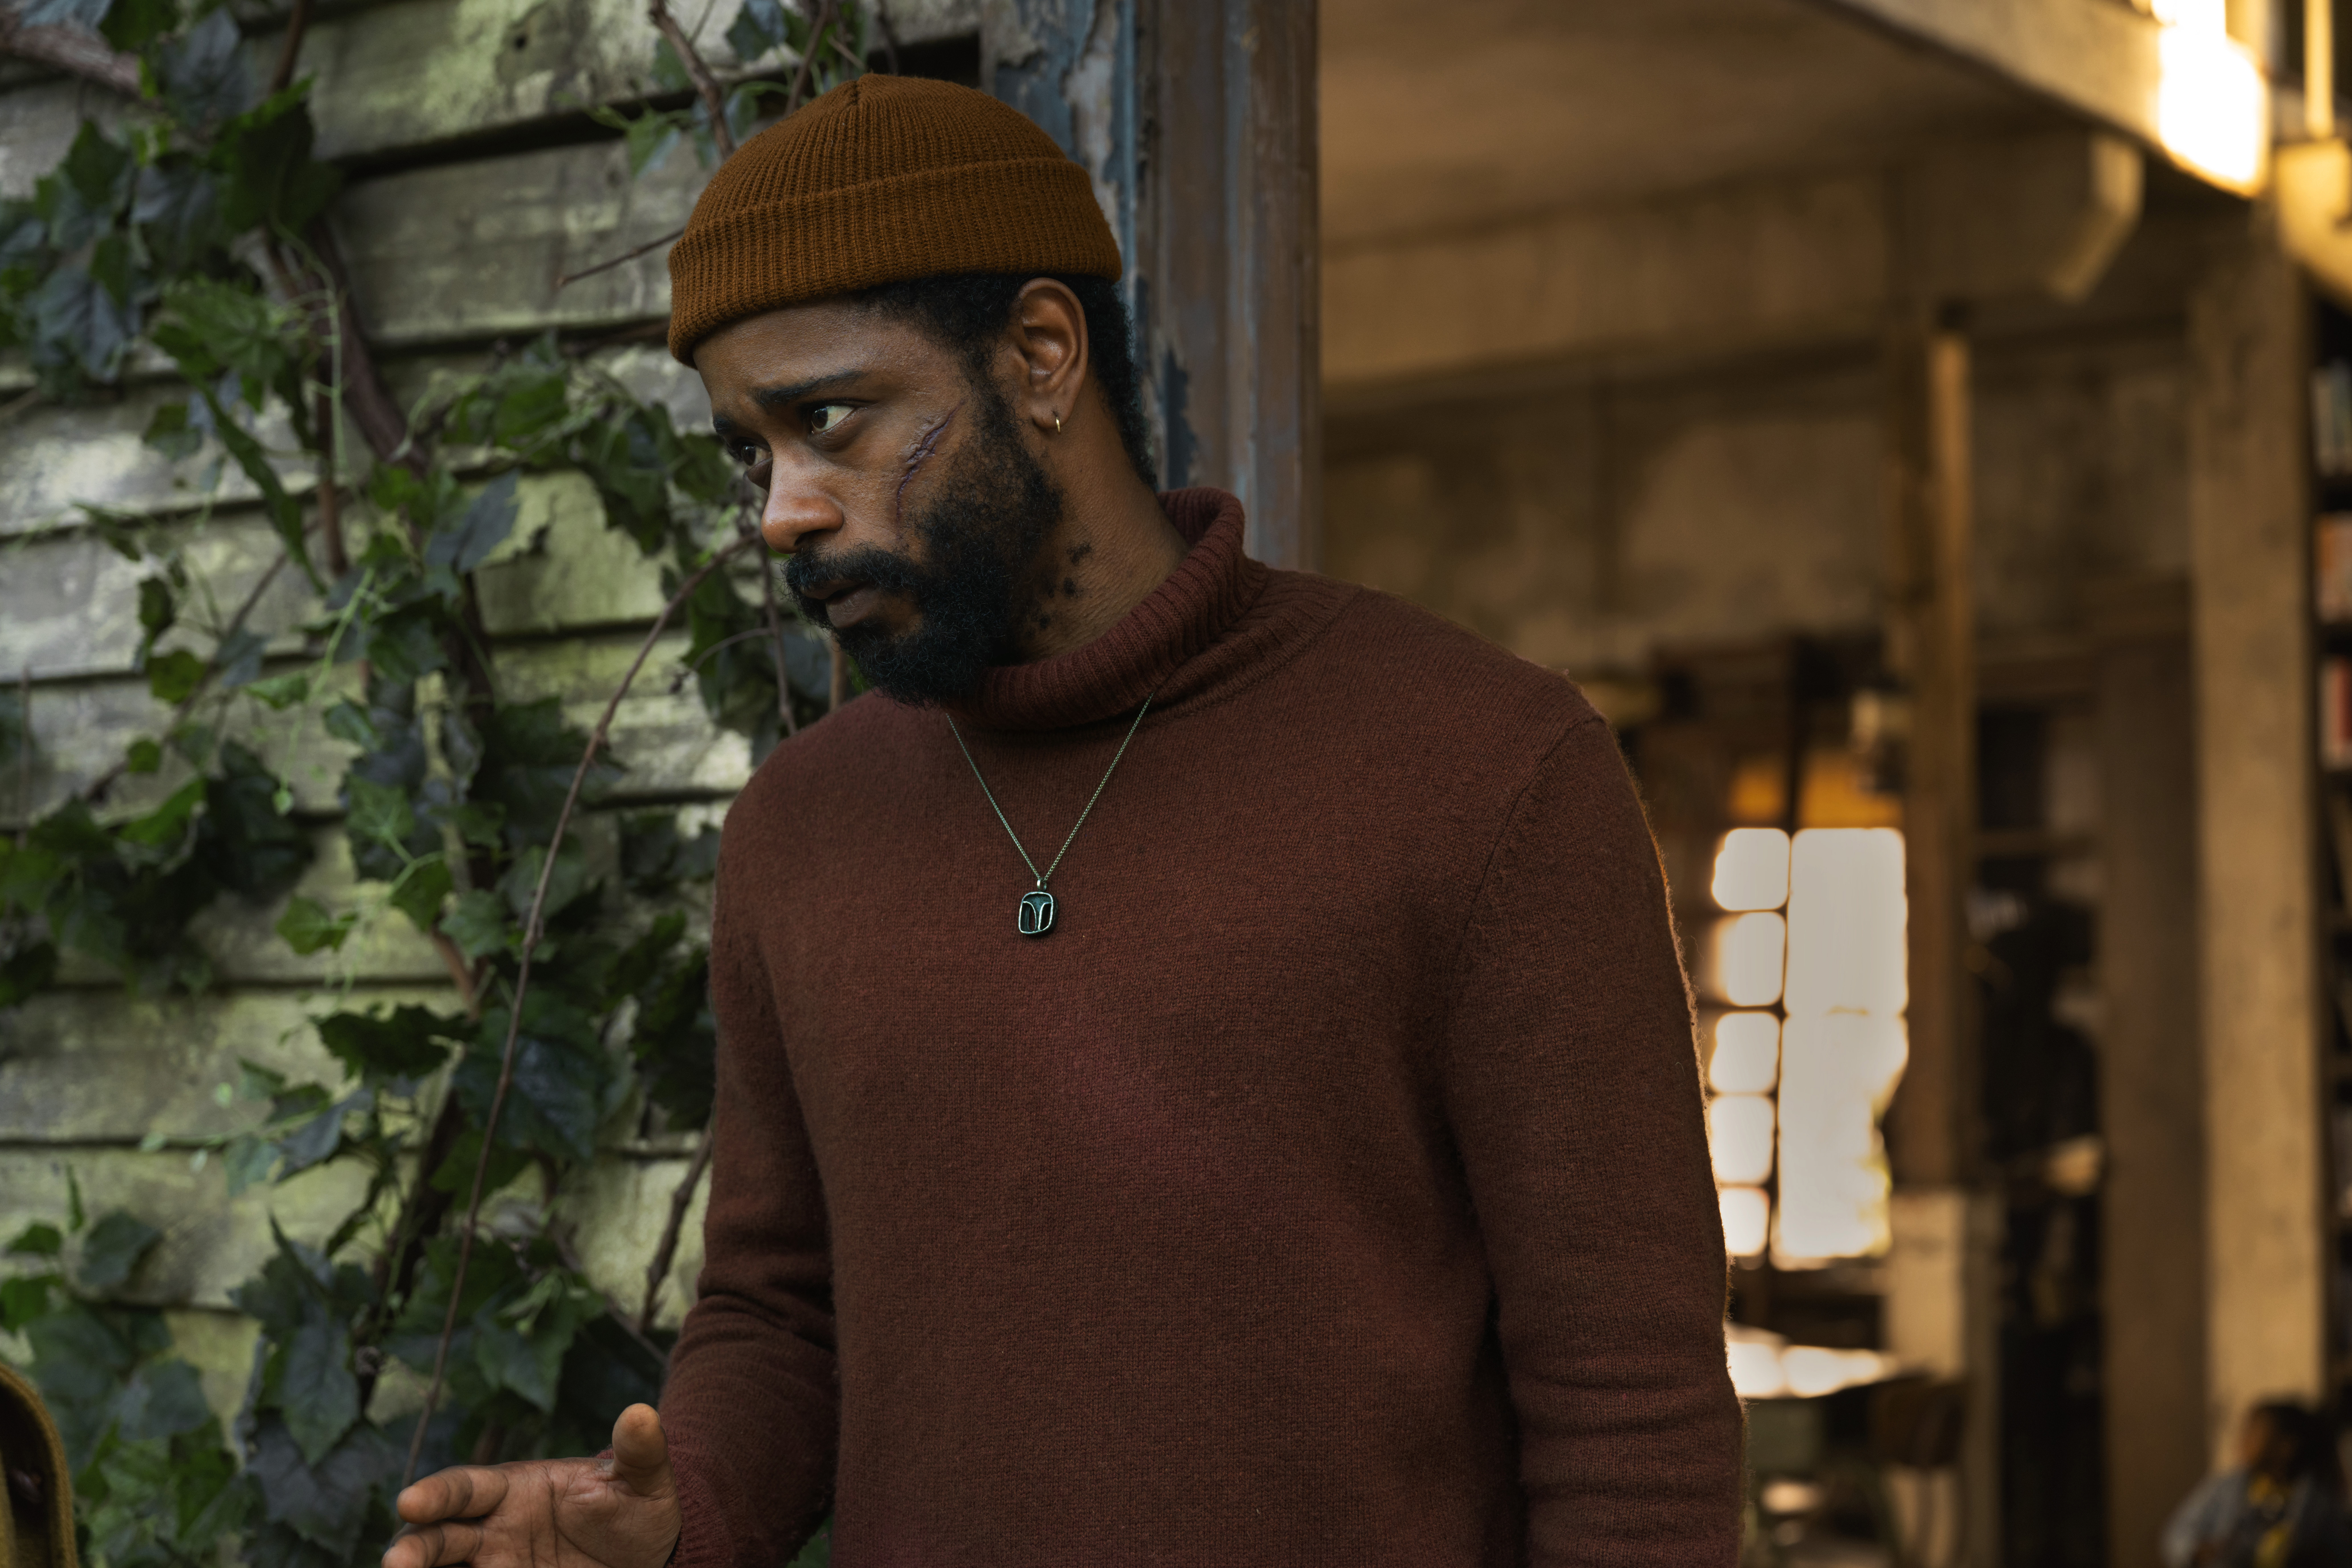 LaKeith Stanfield stars in "The Changeling." Photo credit: Apple TV+